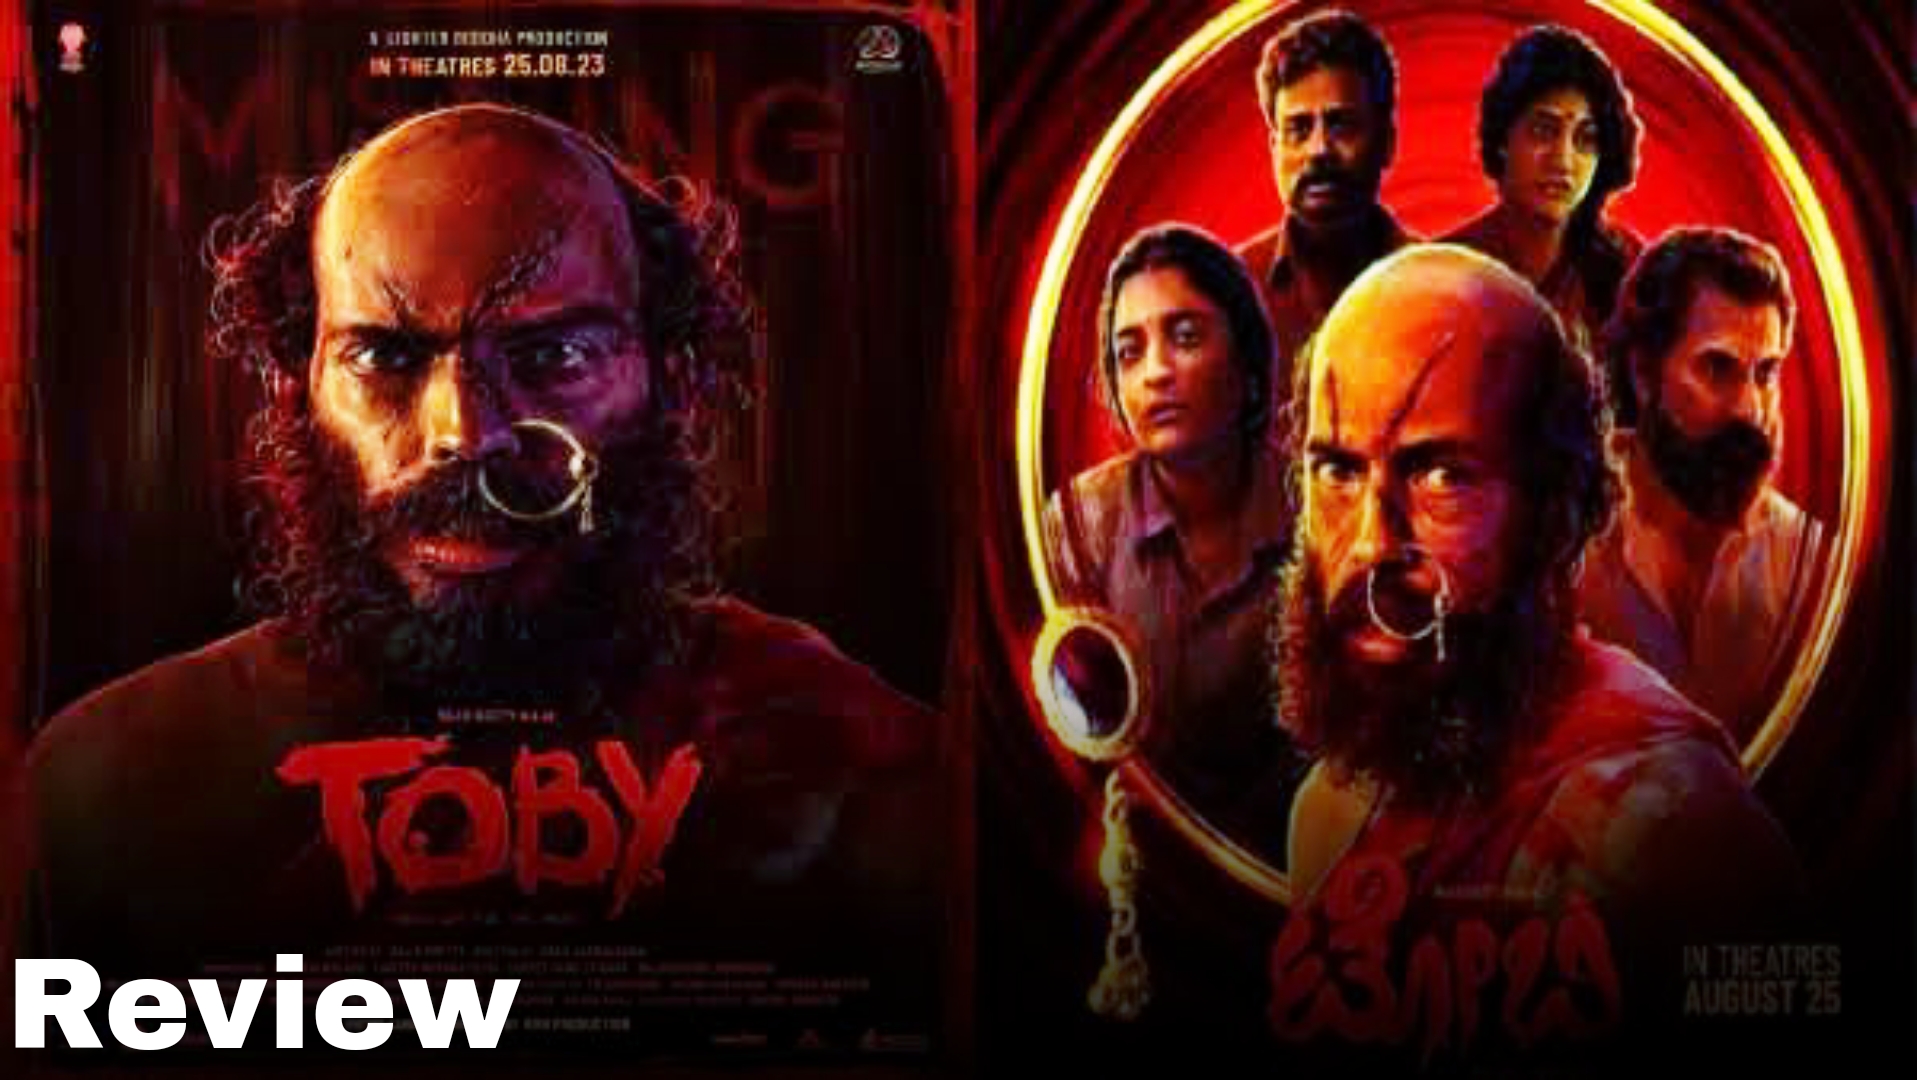 Toby Review In Hindi